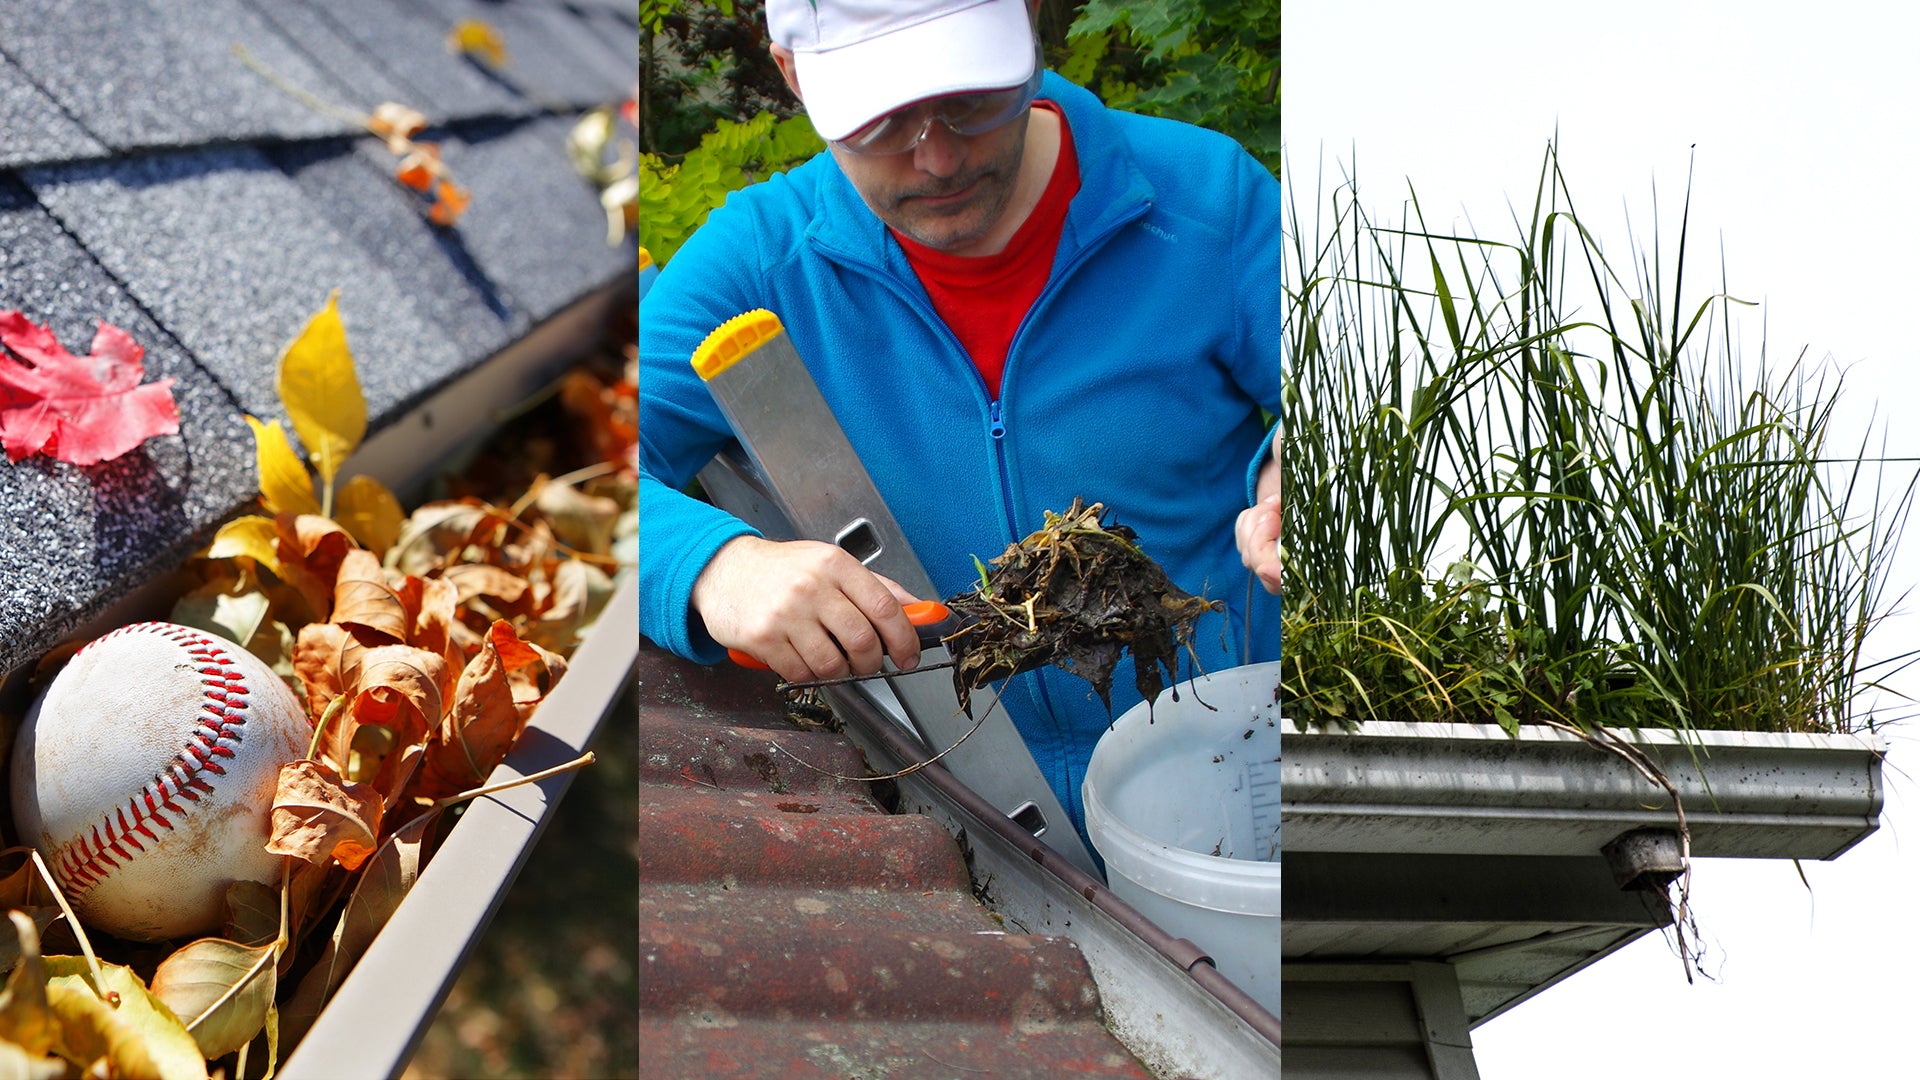 Gutter vacuum systems face challenges with various types of debris, requiring effective cleaning solutions